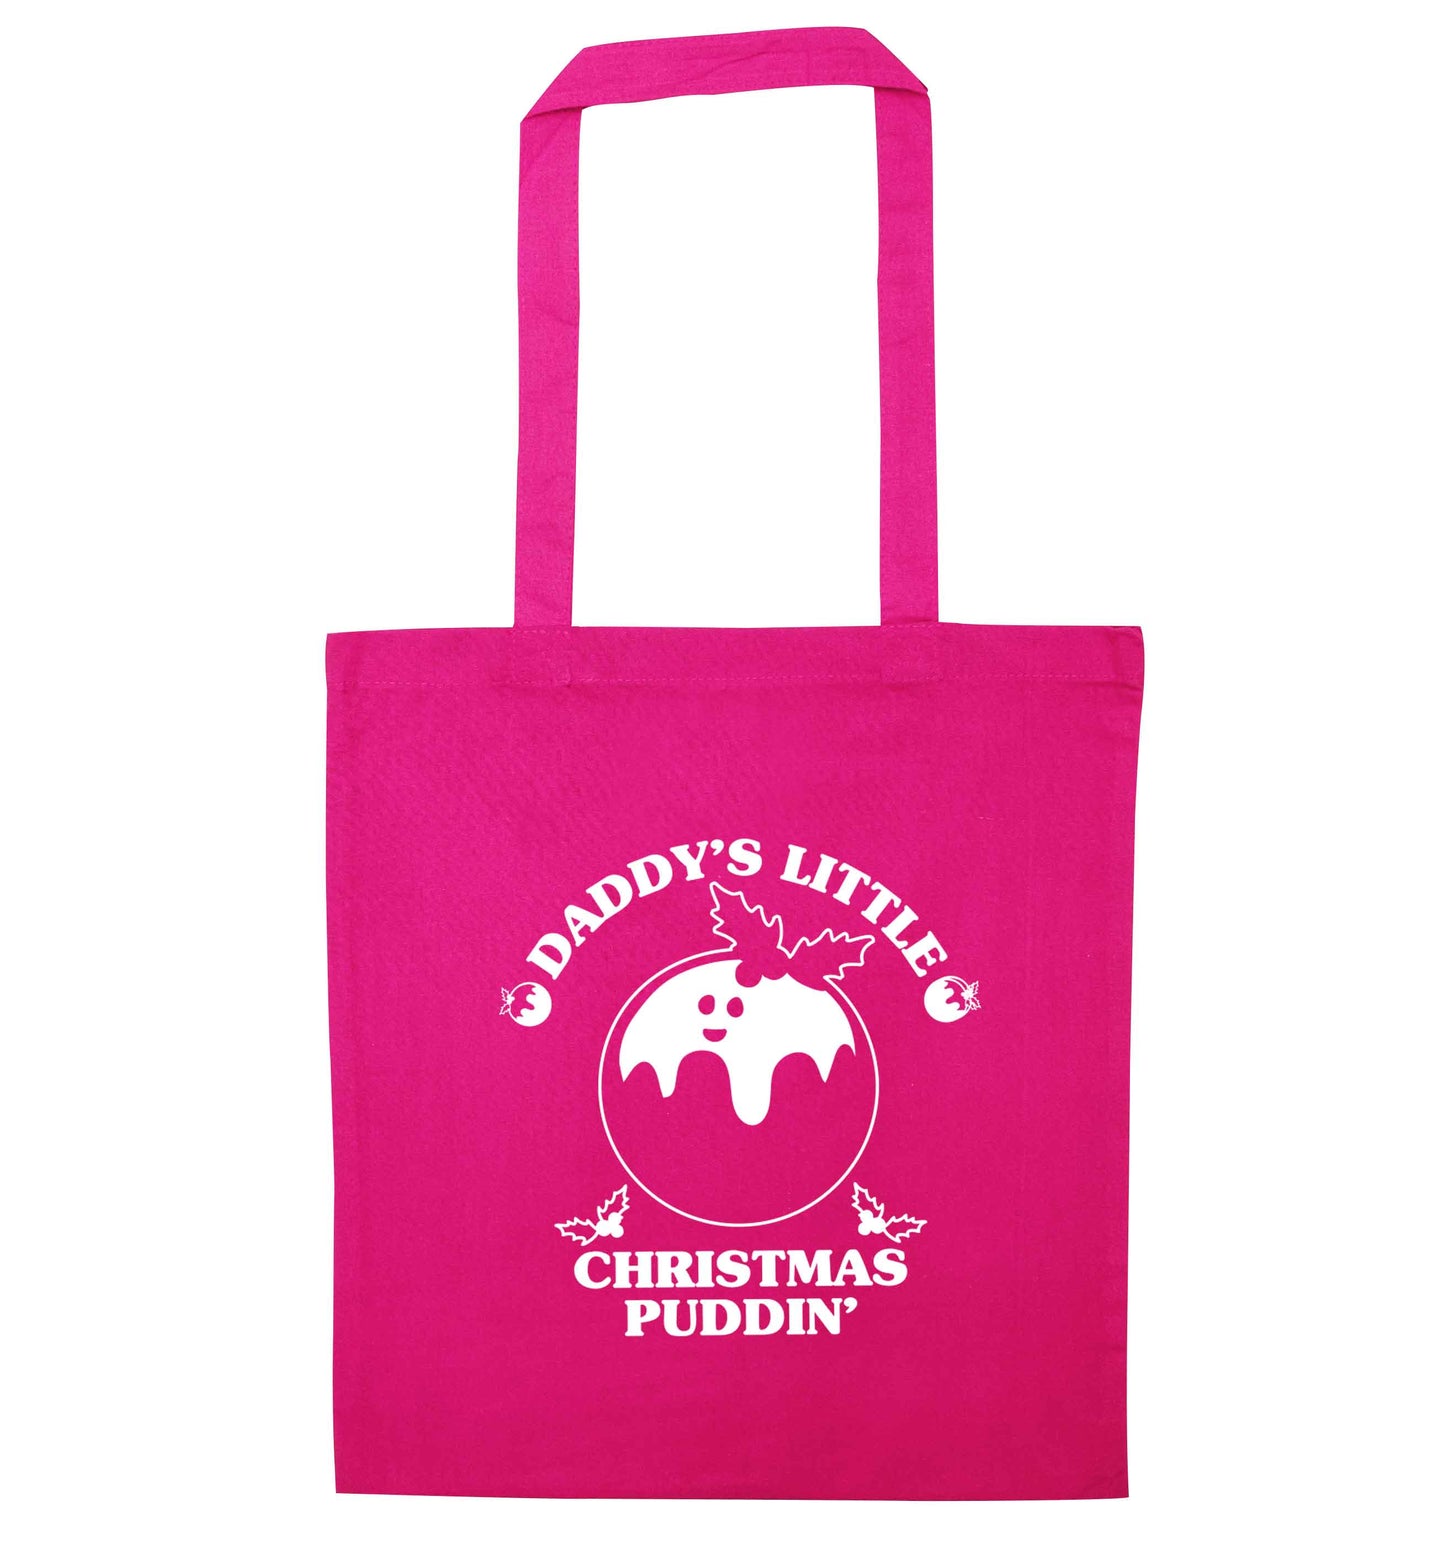 Daddy's little Christmas puddin' pink tote bag